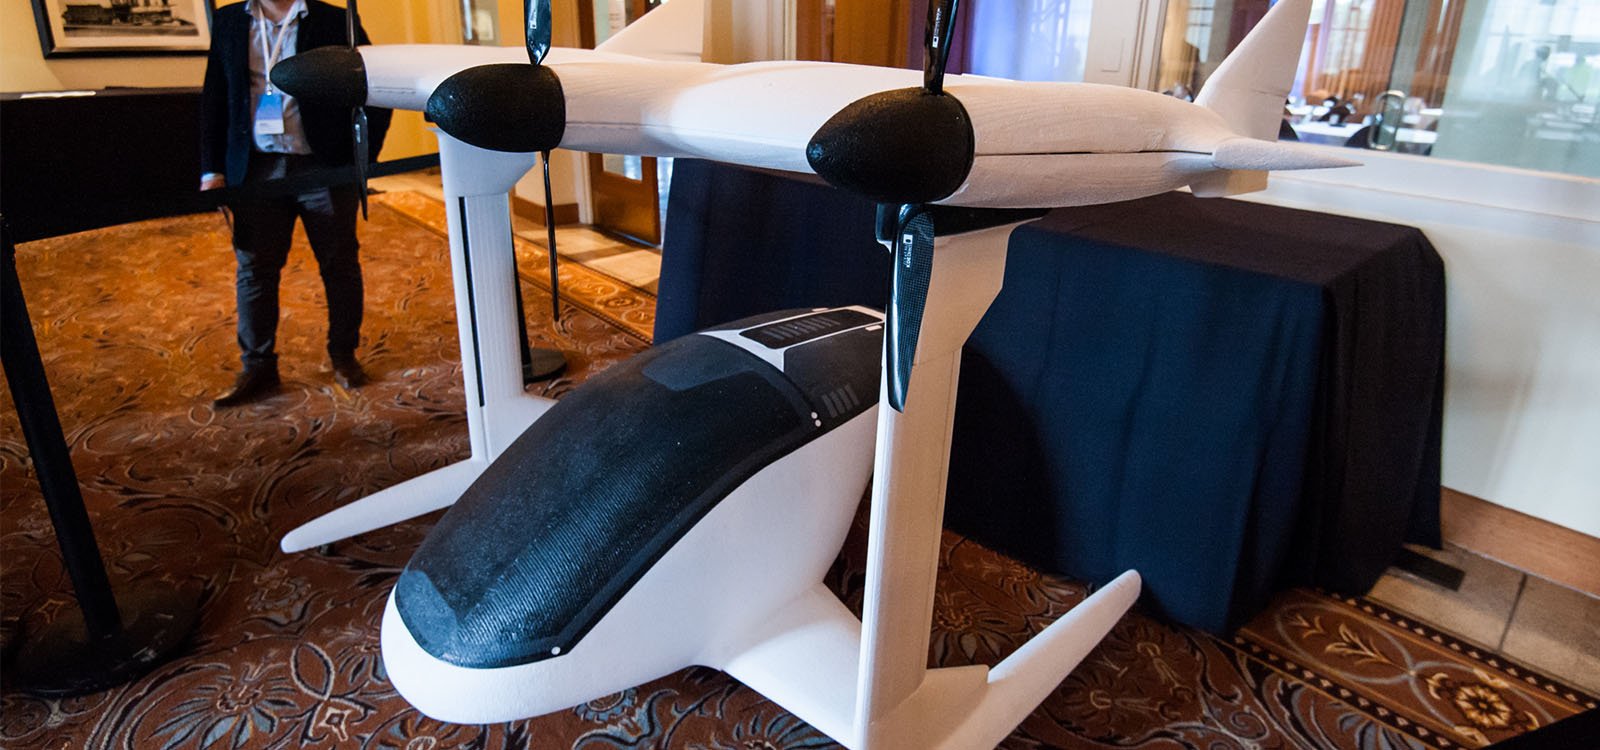 Vertical takeoff and landing aircraft model at the Uber Elevate Summit